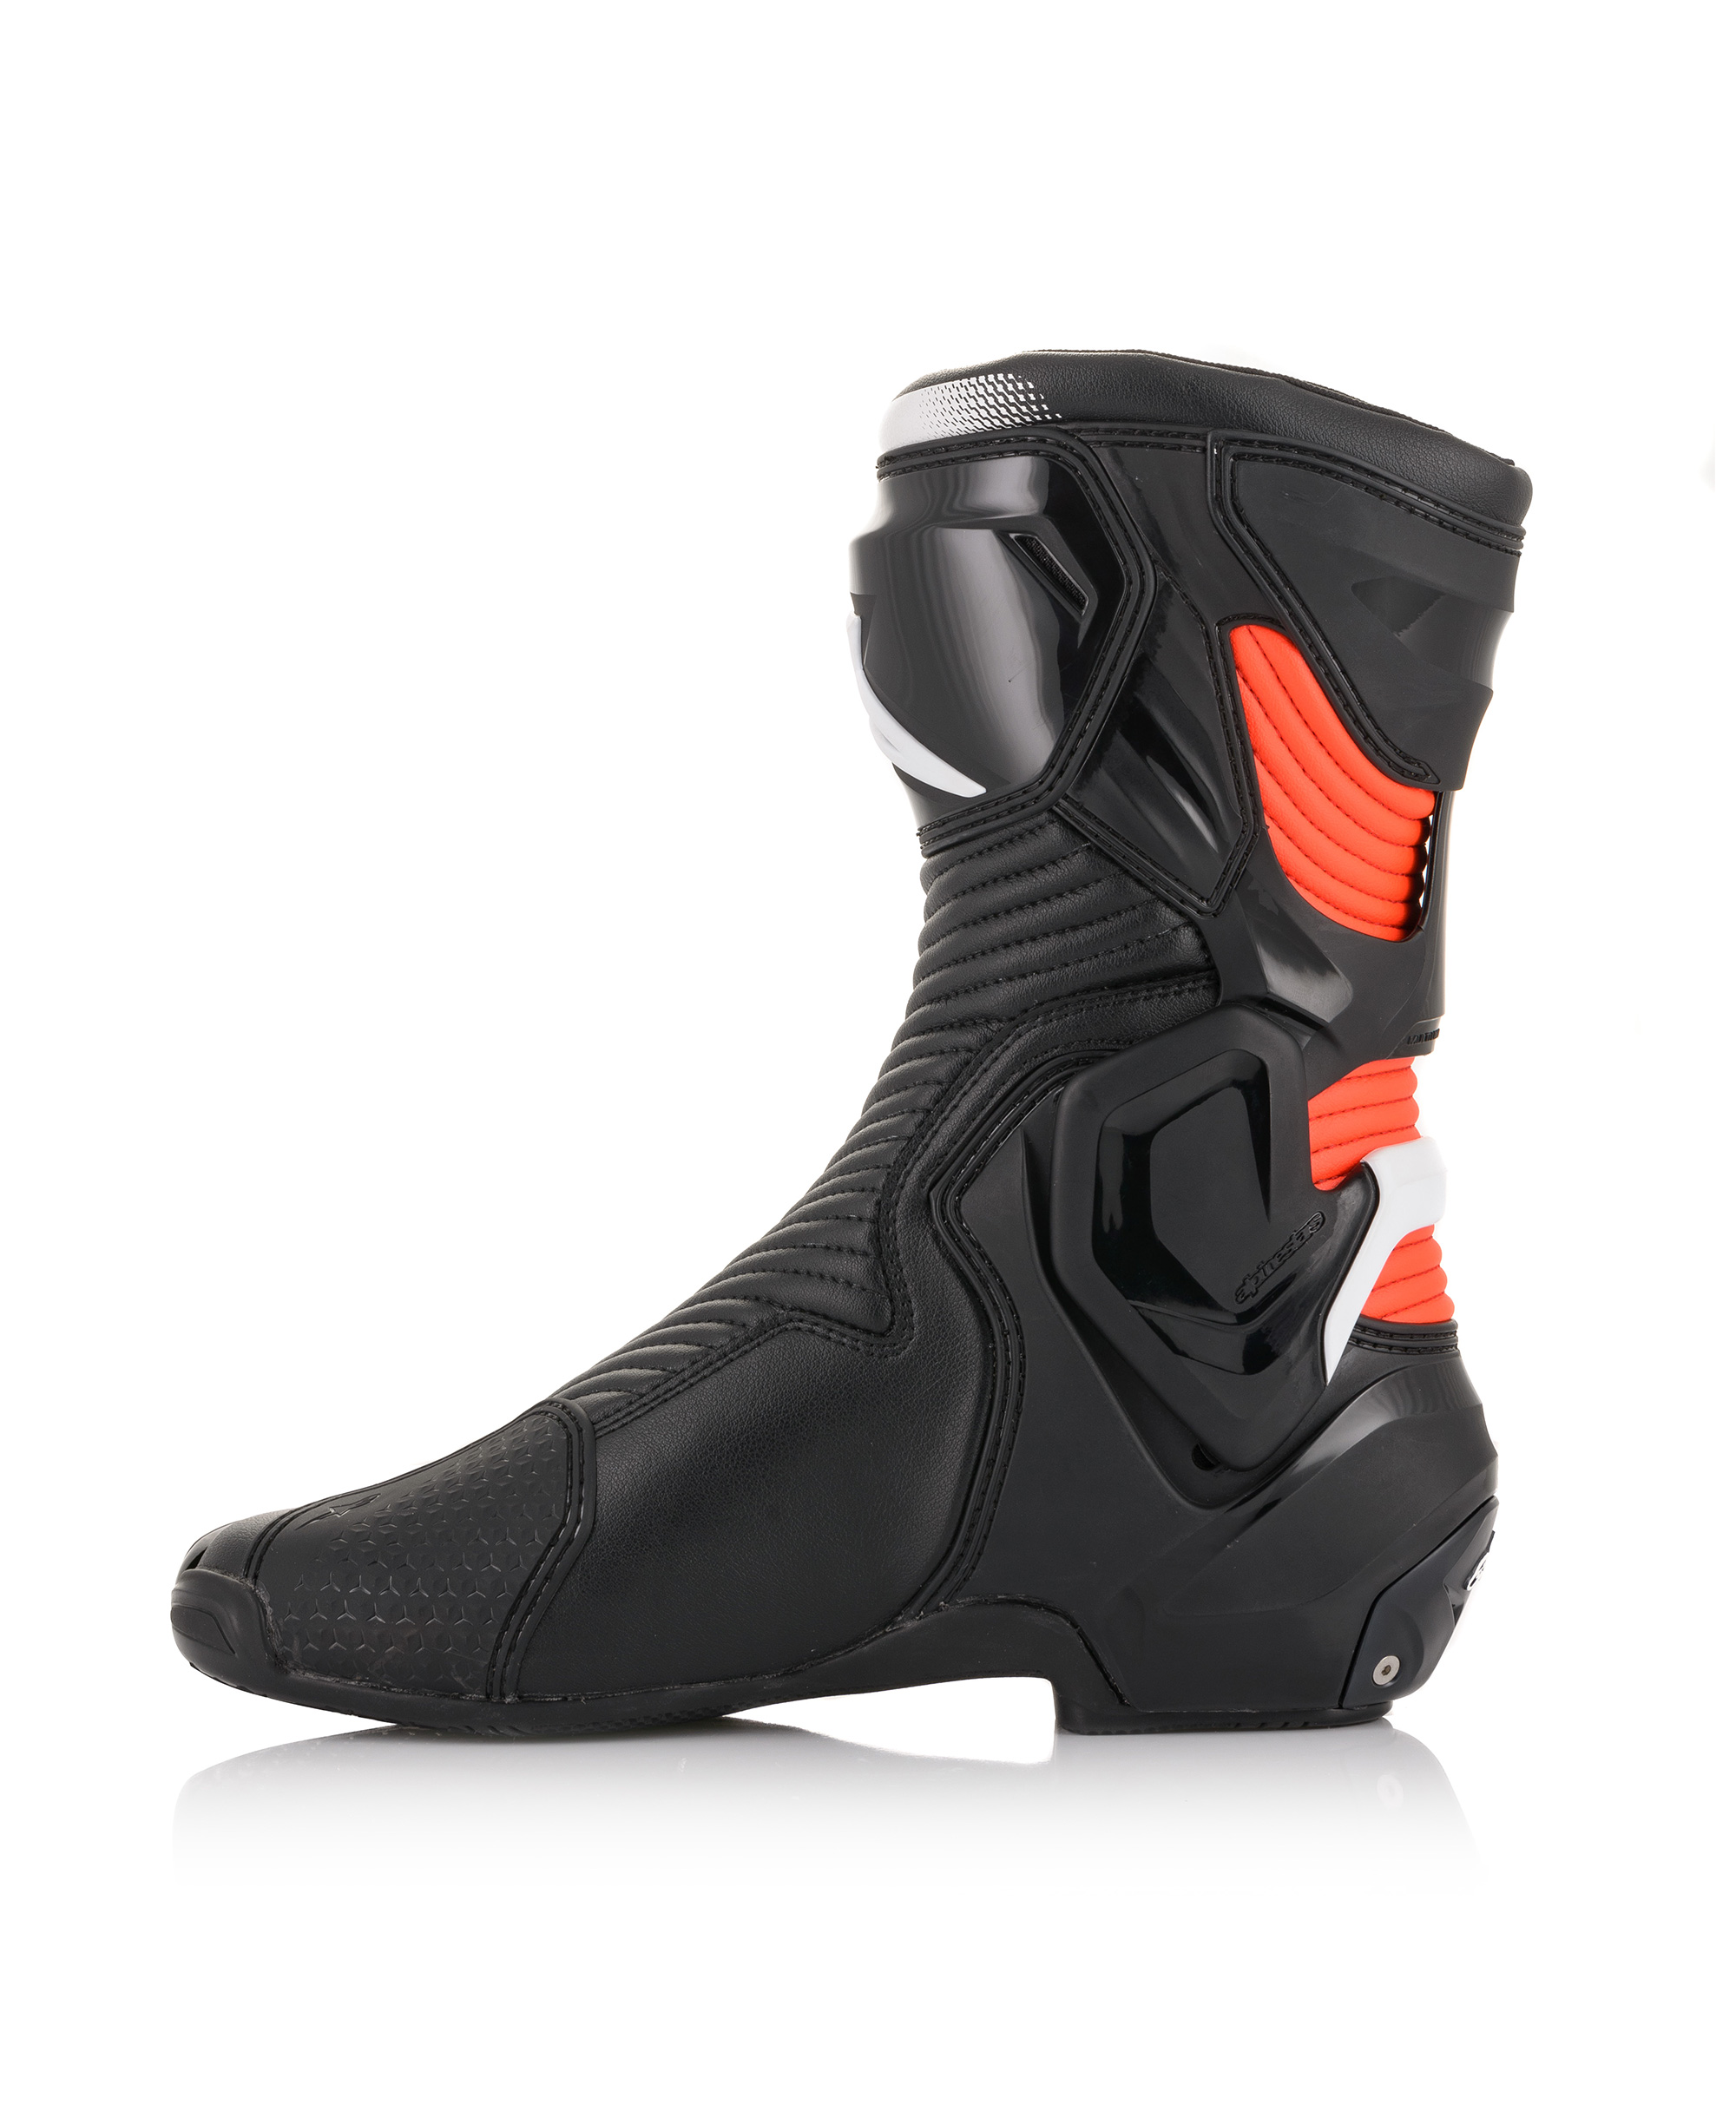 SMX PLUS V2 BOOTS BLACK WHITE RED FLUO